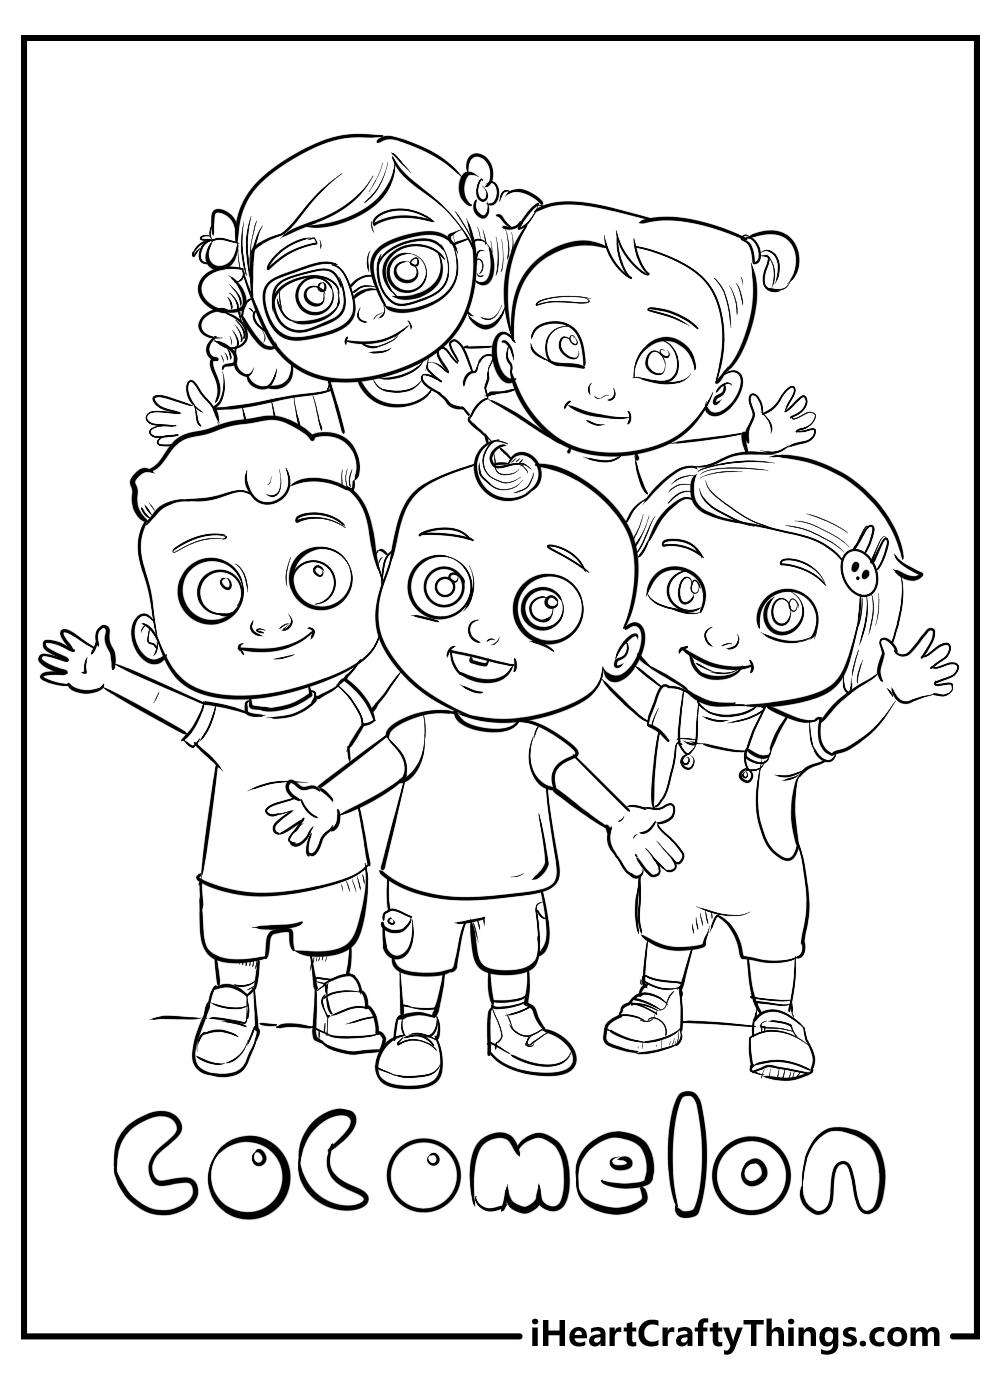 Printable coelon coloring pages updated